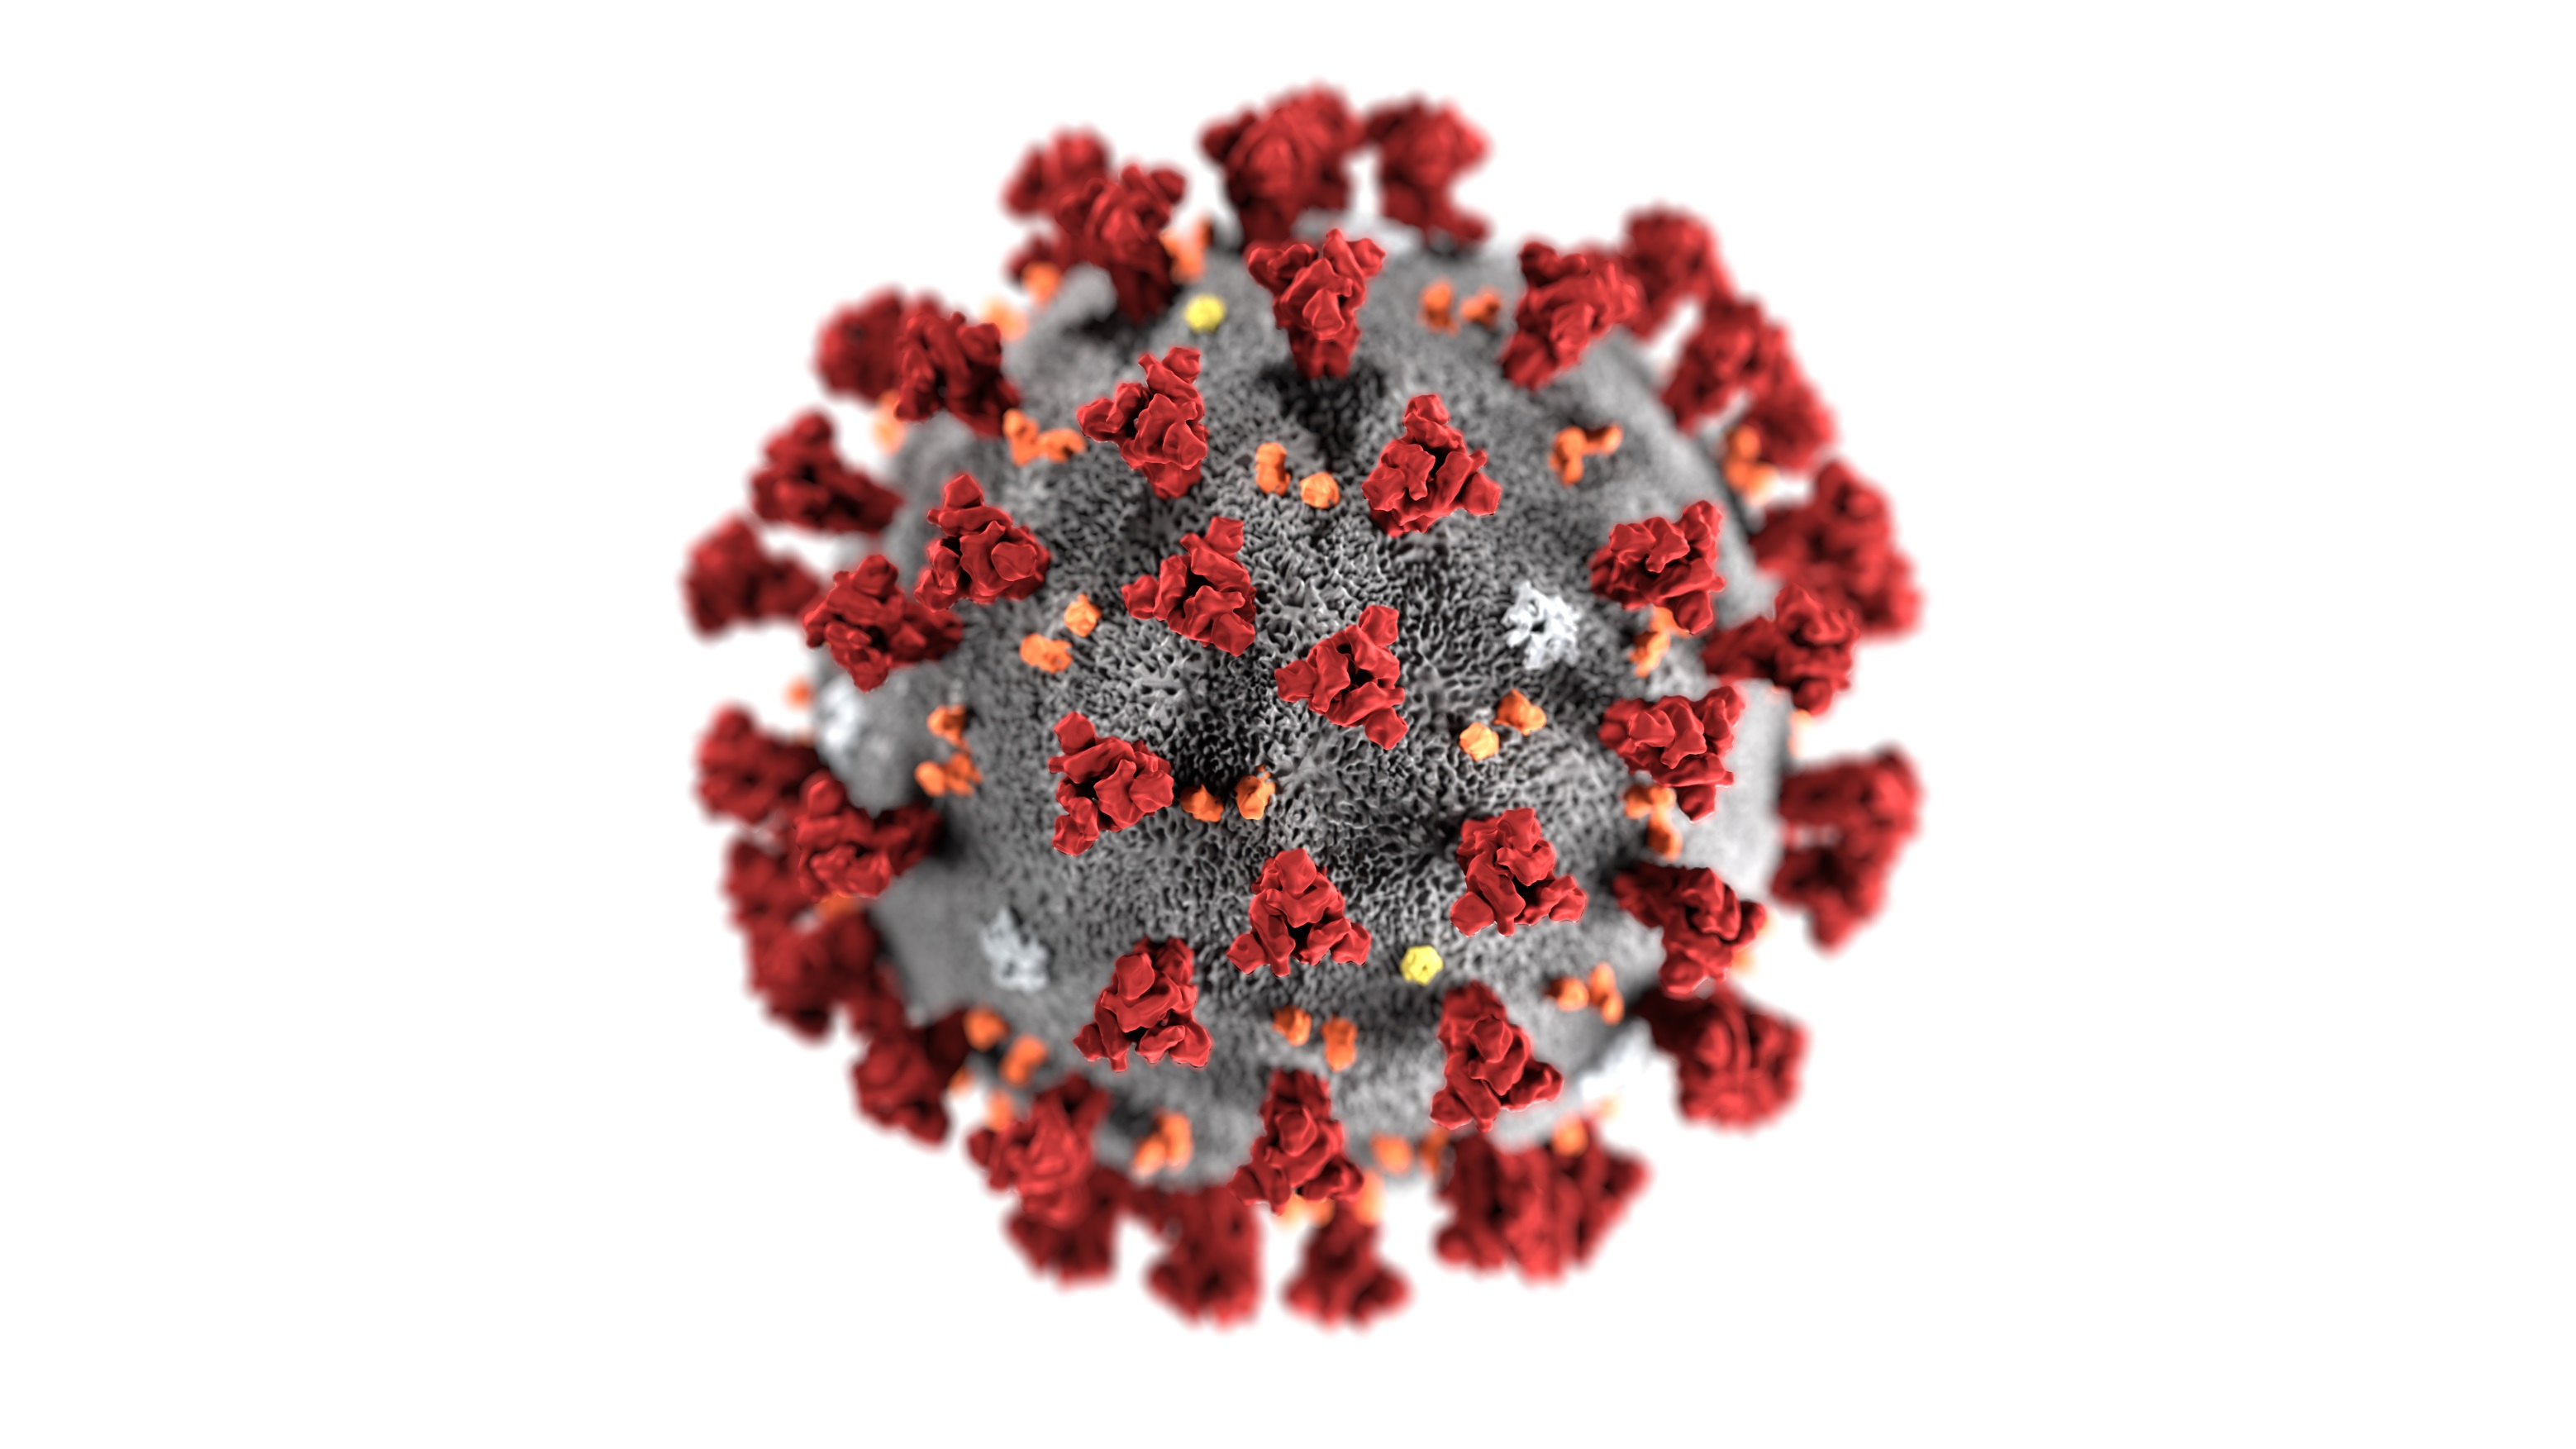 Illustration: Coronavirus with the red surface molecule called spike.